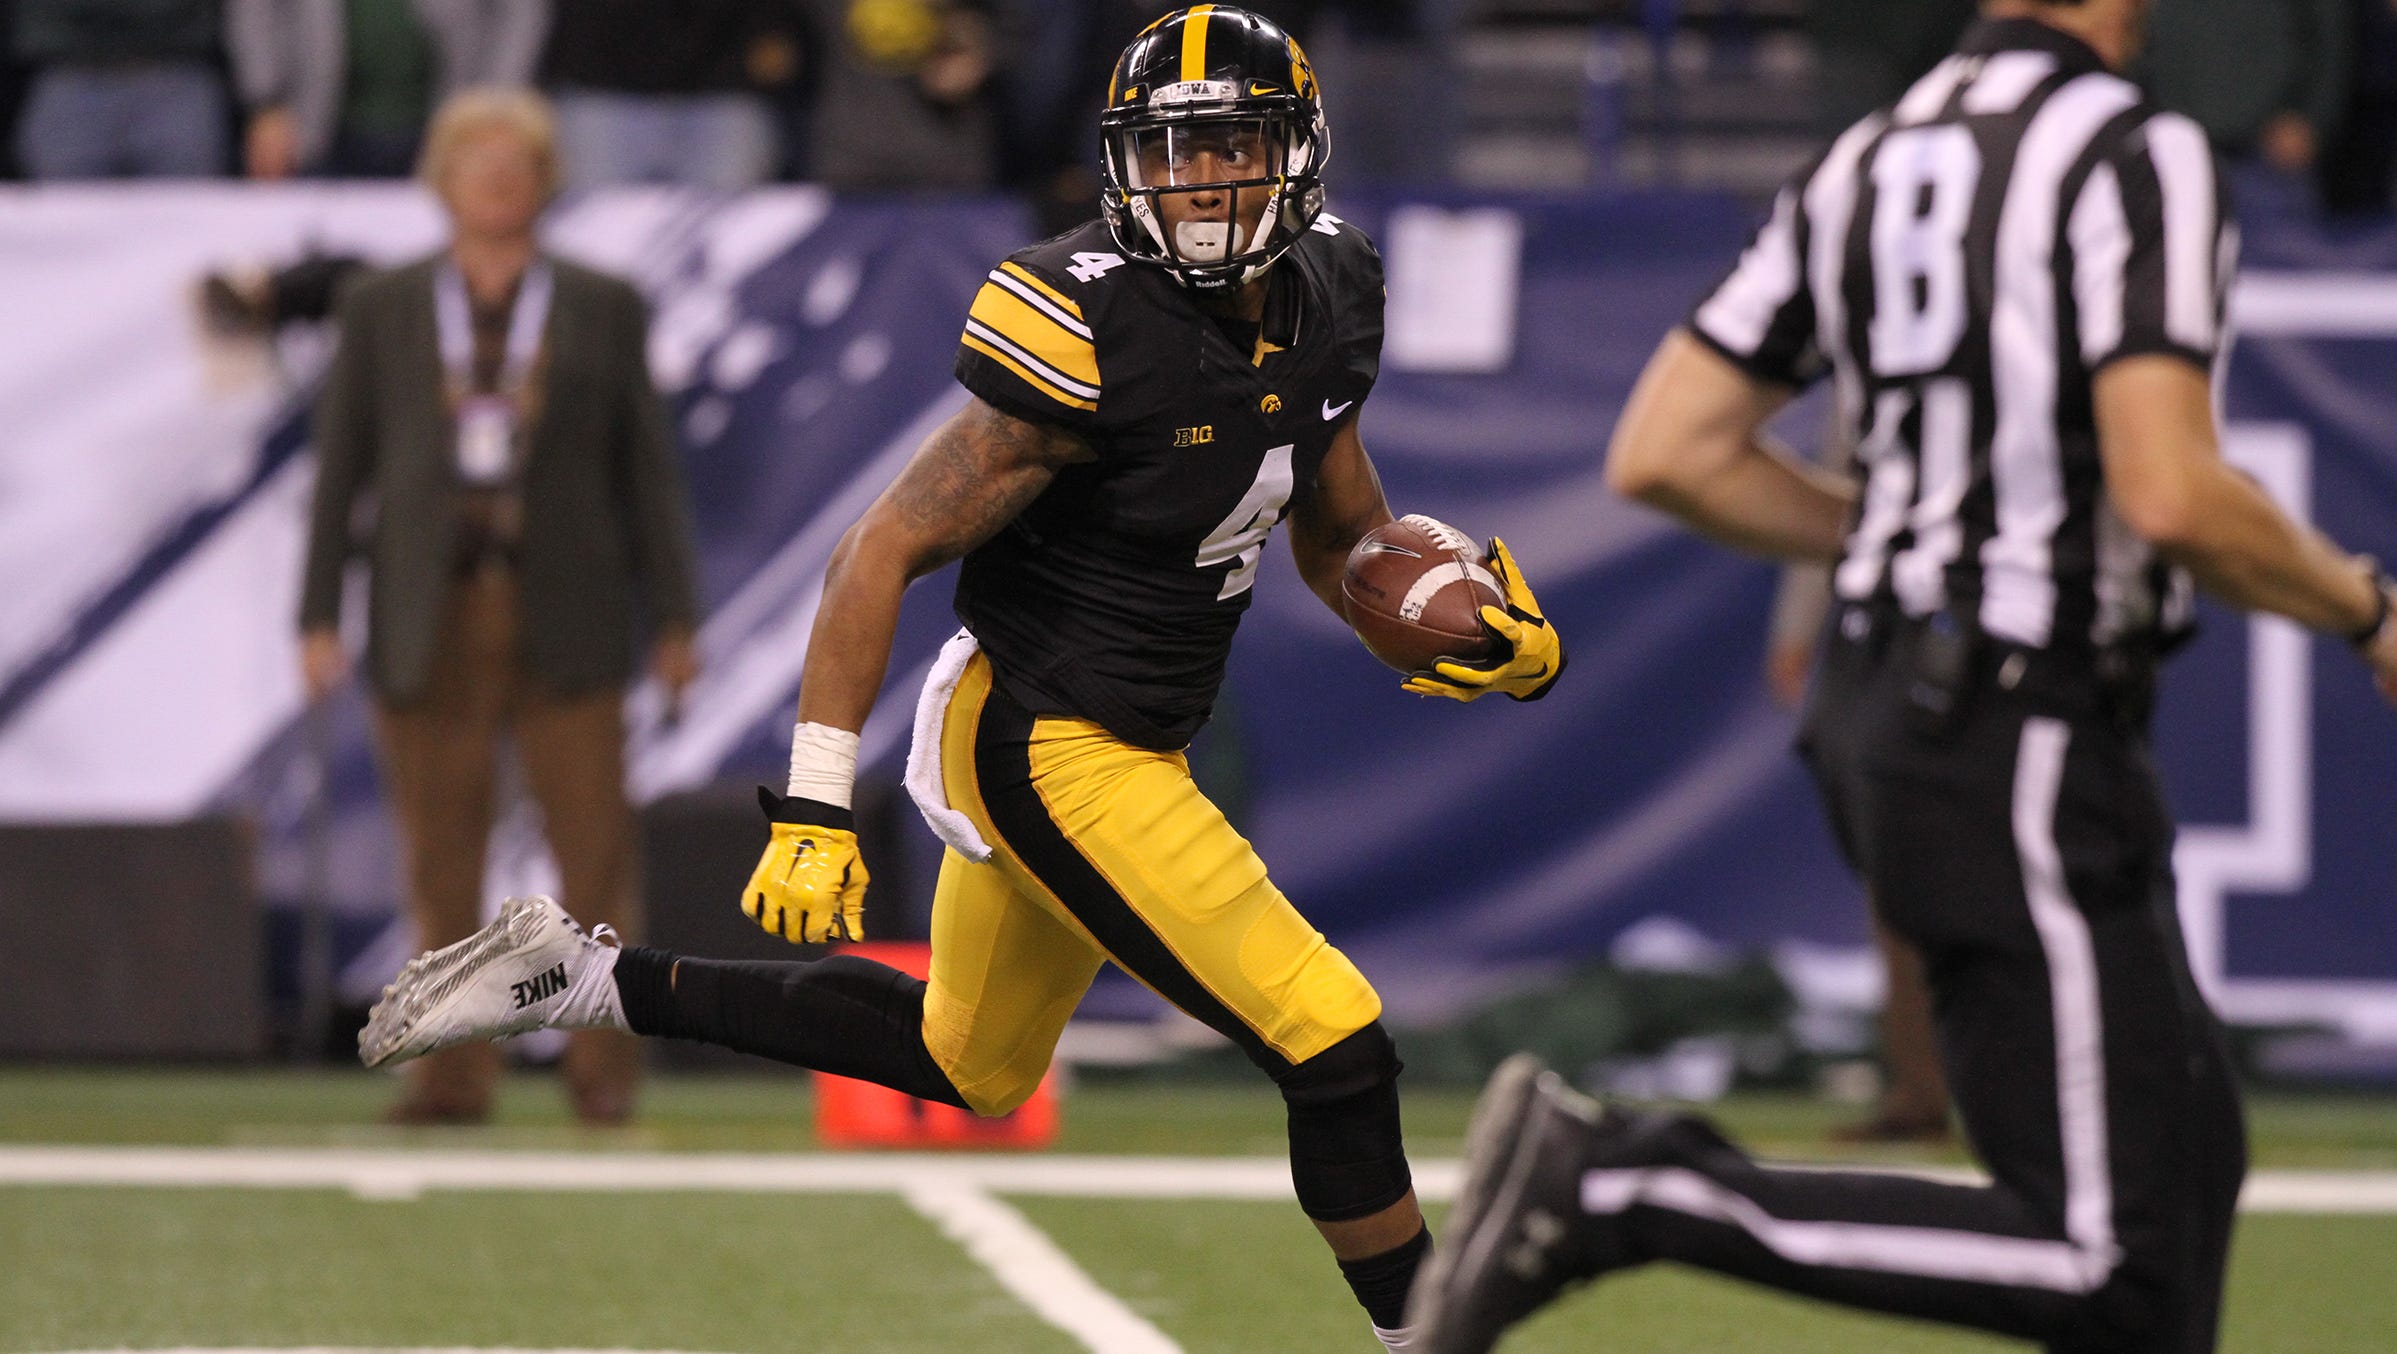 Iowa's Tevaun Smith runs down field for an 85-yard touchdown during the Hawkeyes' Big Ten Championship game against Michigan State at Lucas Oil Stadium in Indianapolis, Ind. on Saturday, Dec. 5, 2015.